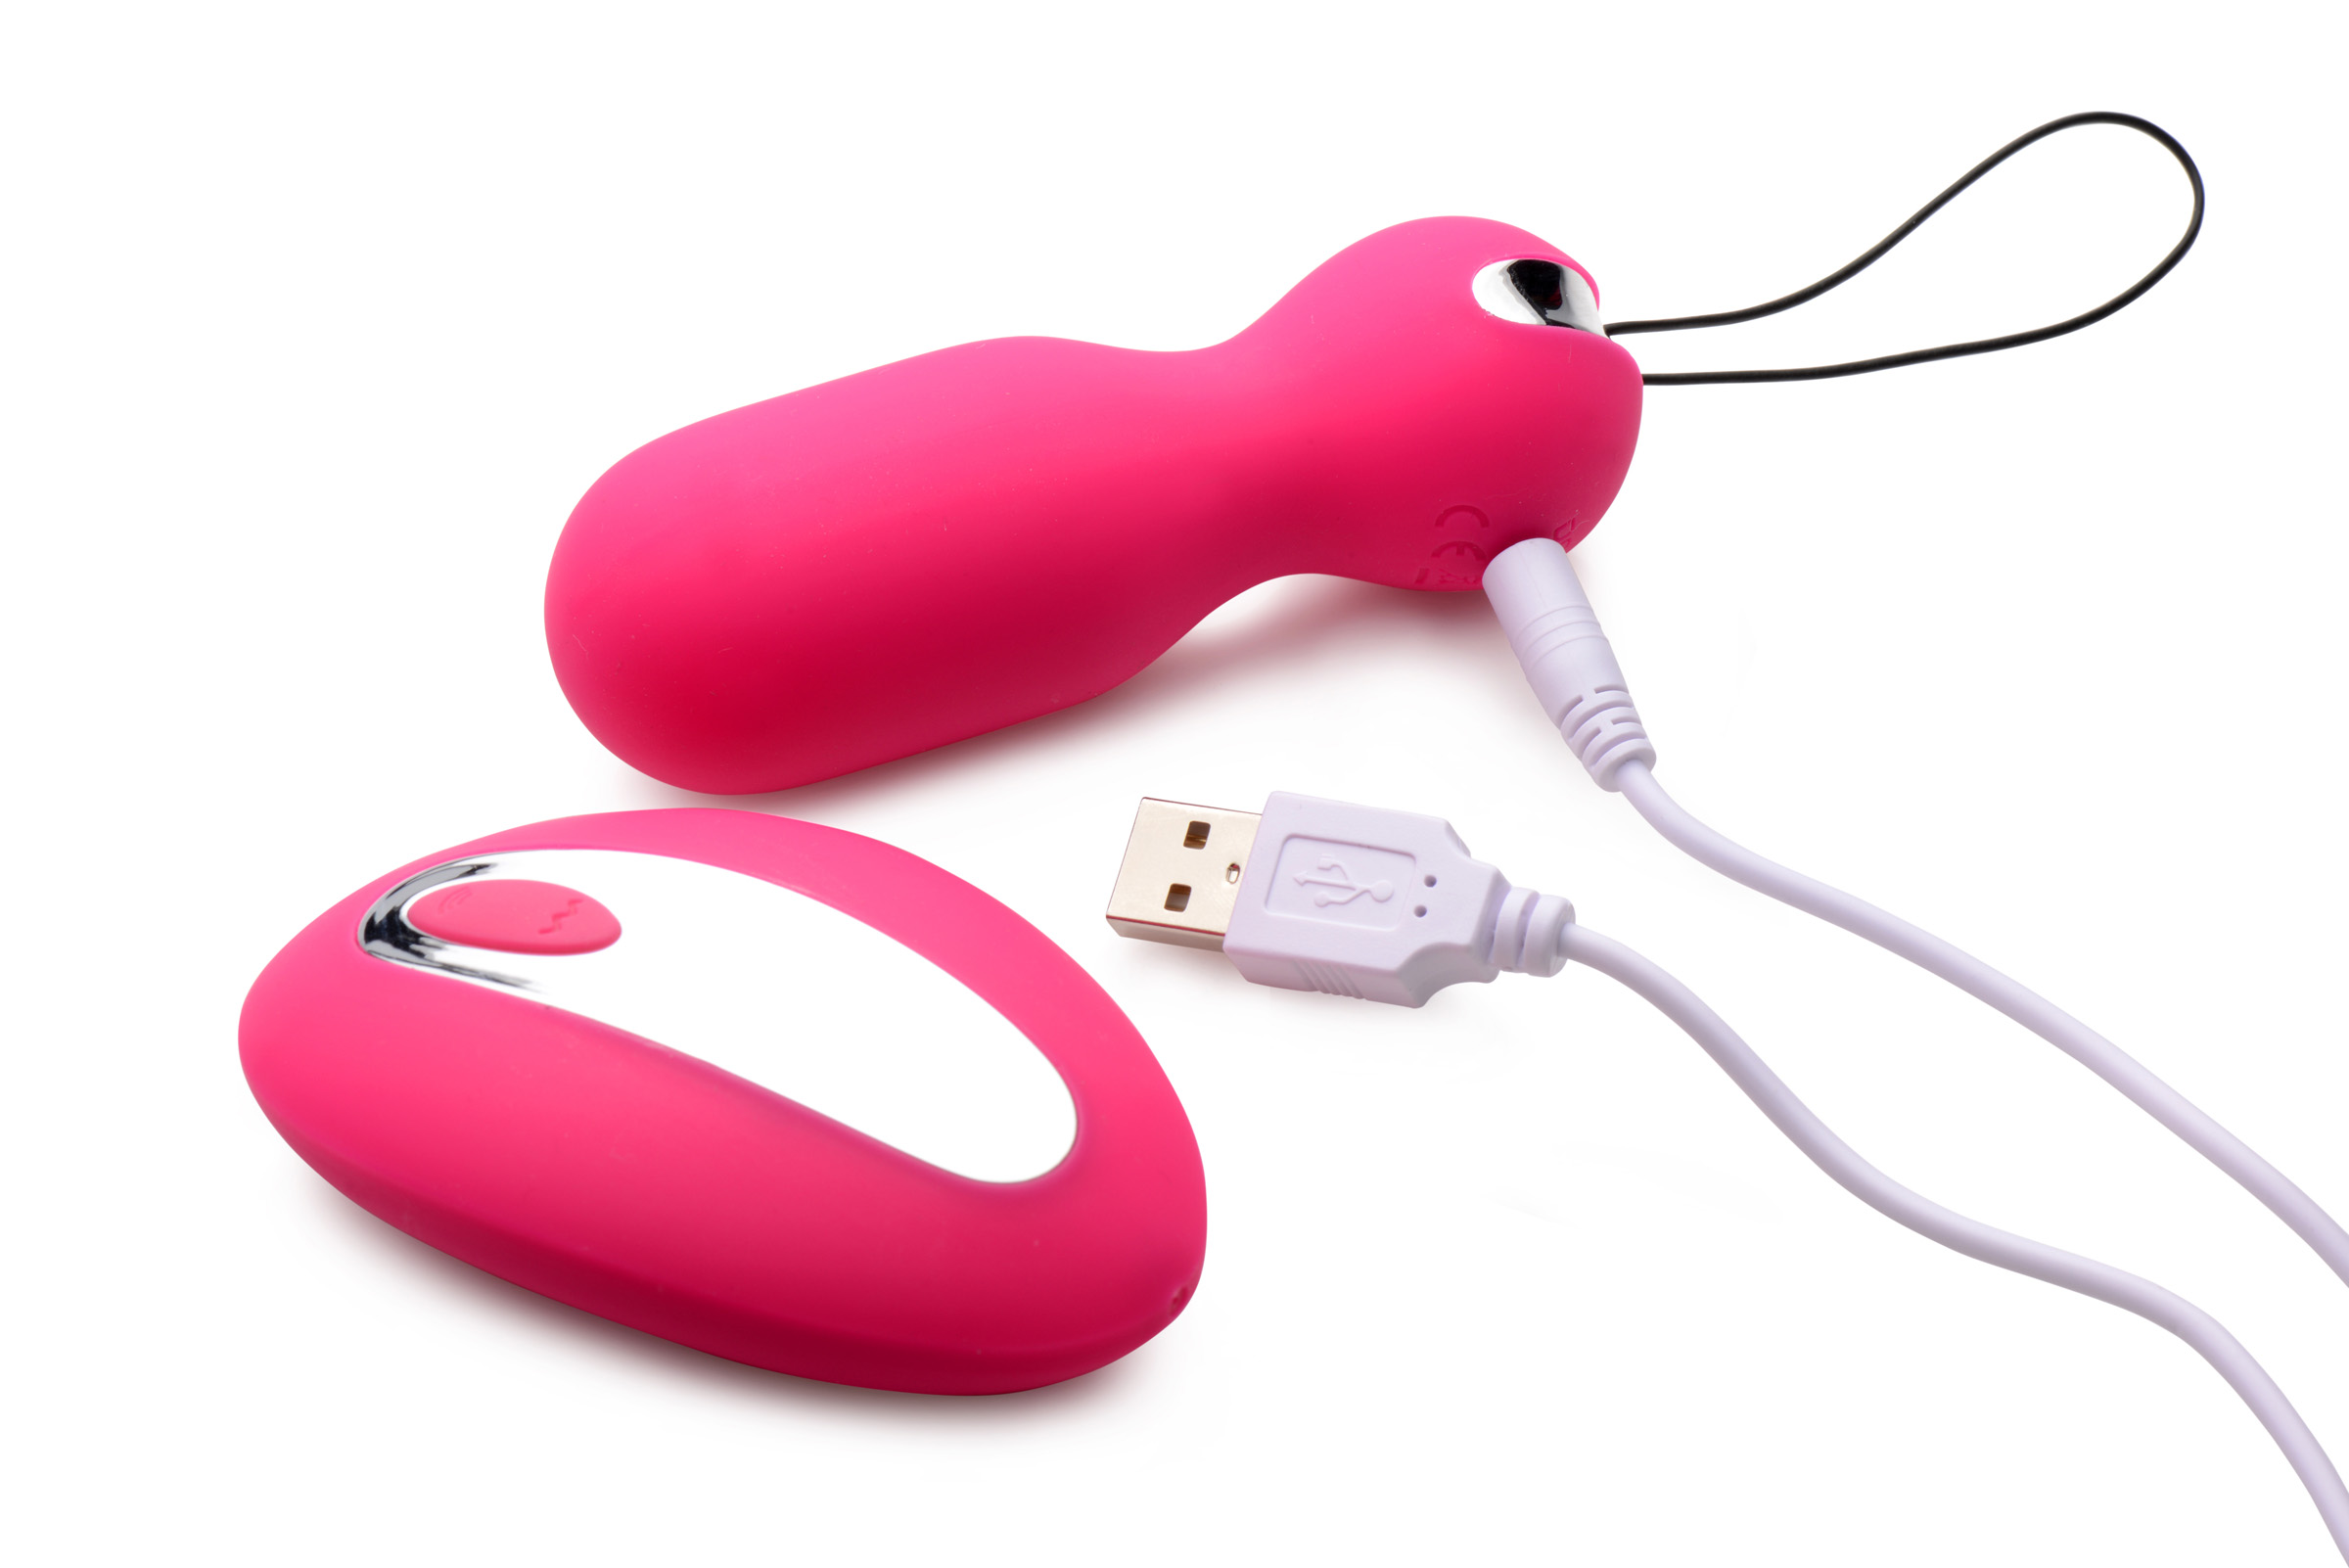 Utoo dolphin sex toys control with remote app